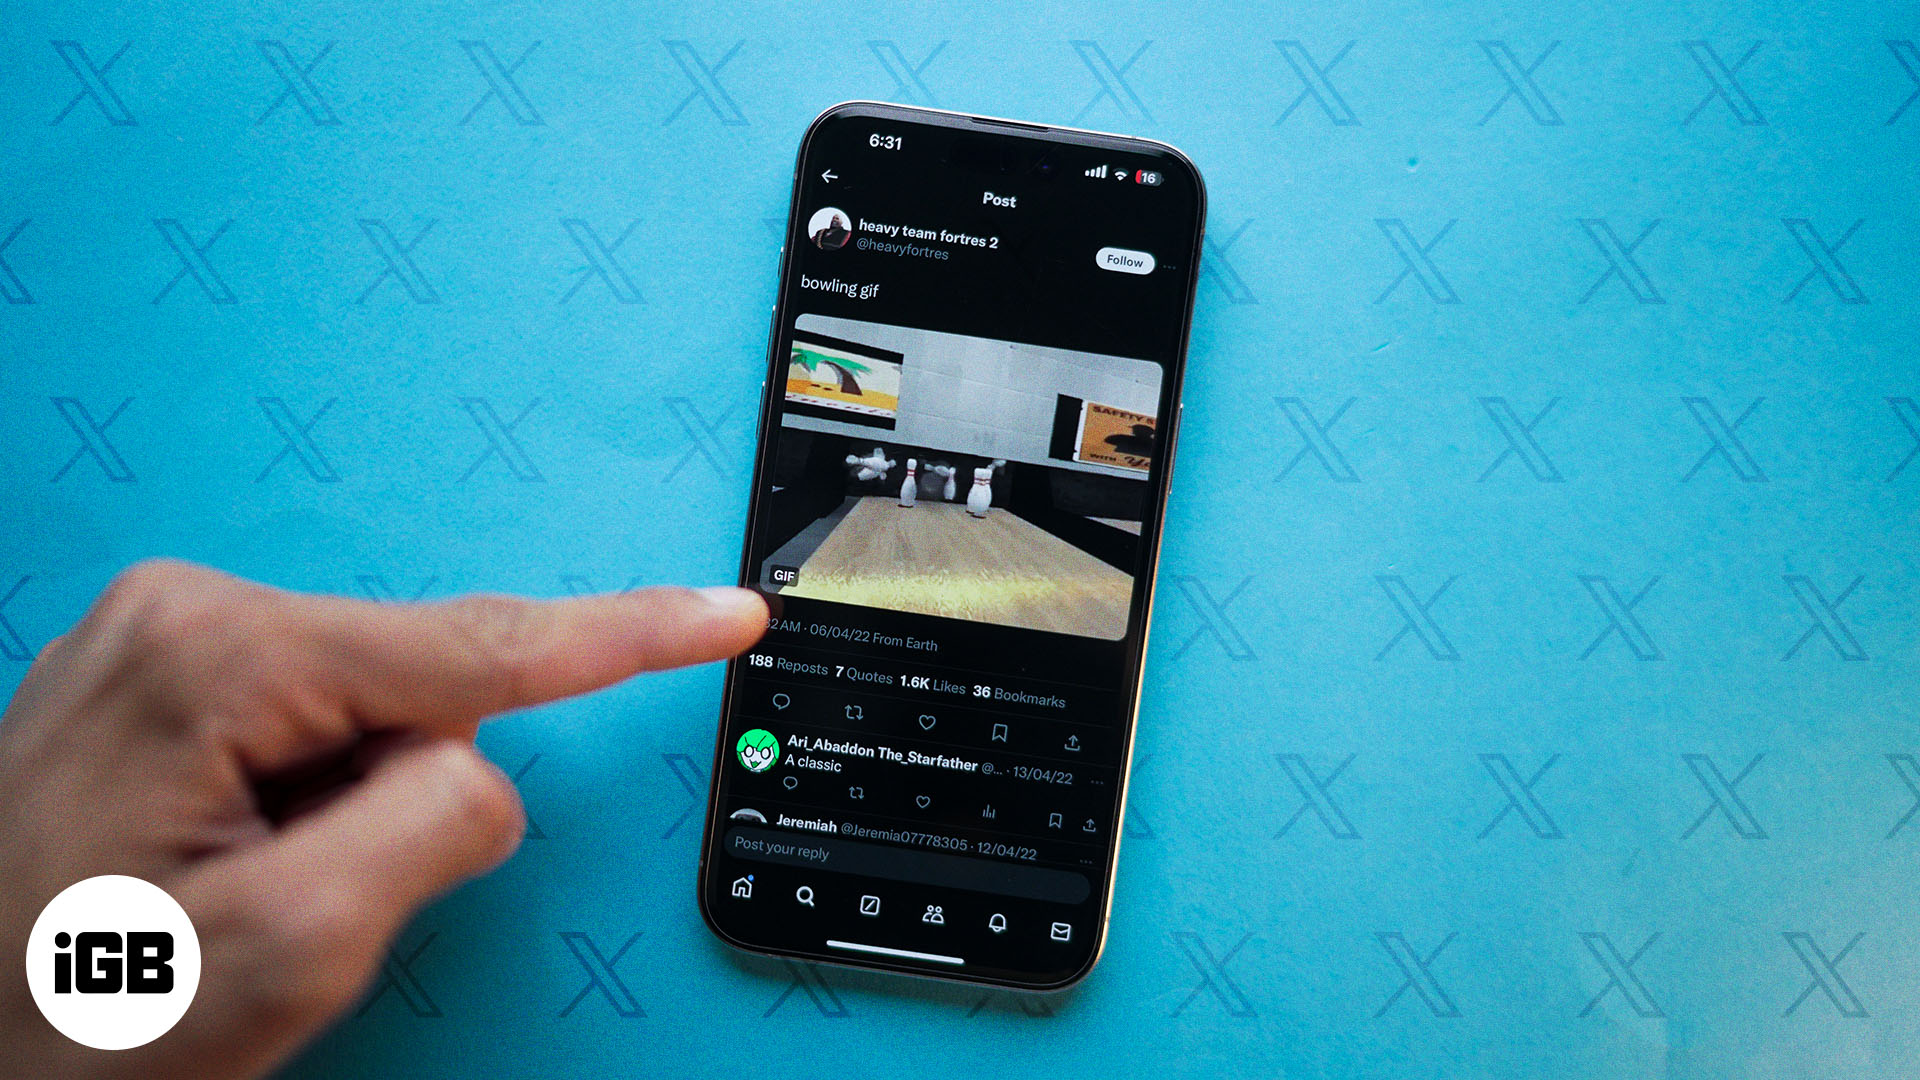 How to save GIFs from Twitter on iPhone or iPad